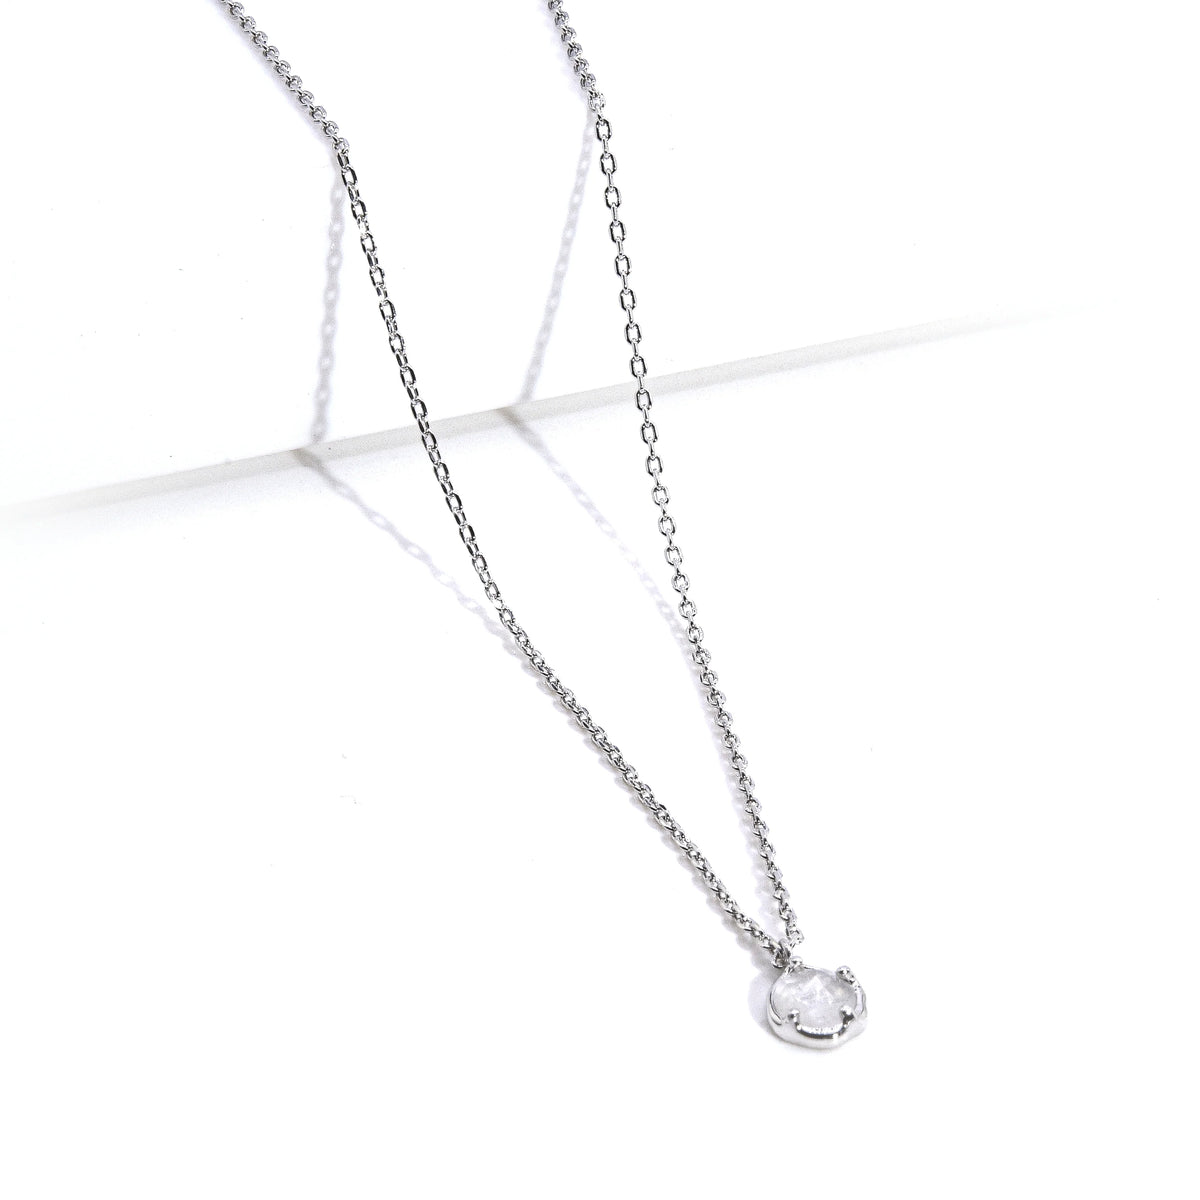 The Sweet Tea Moonstone Necklace